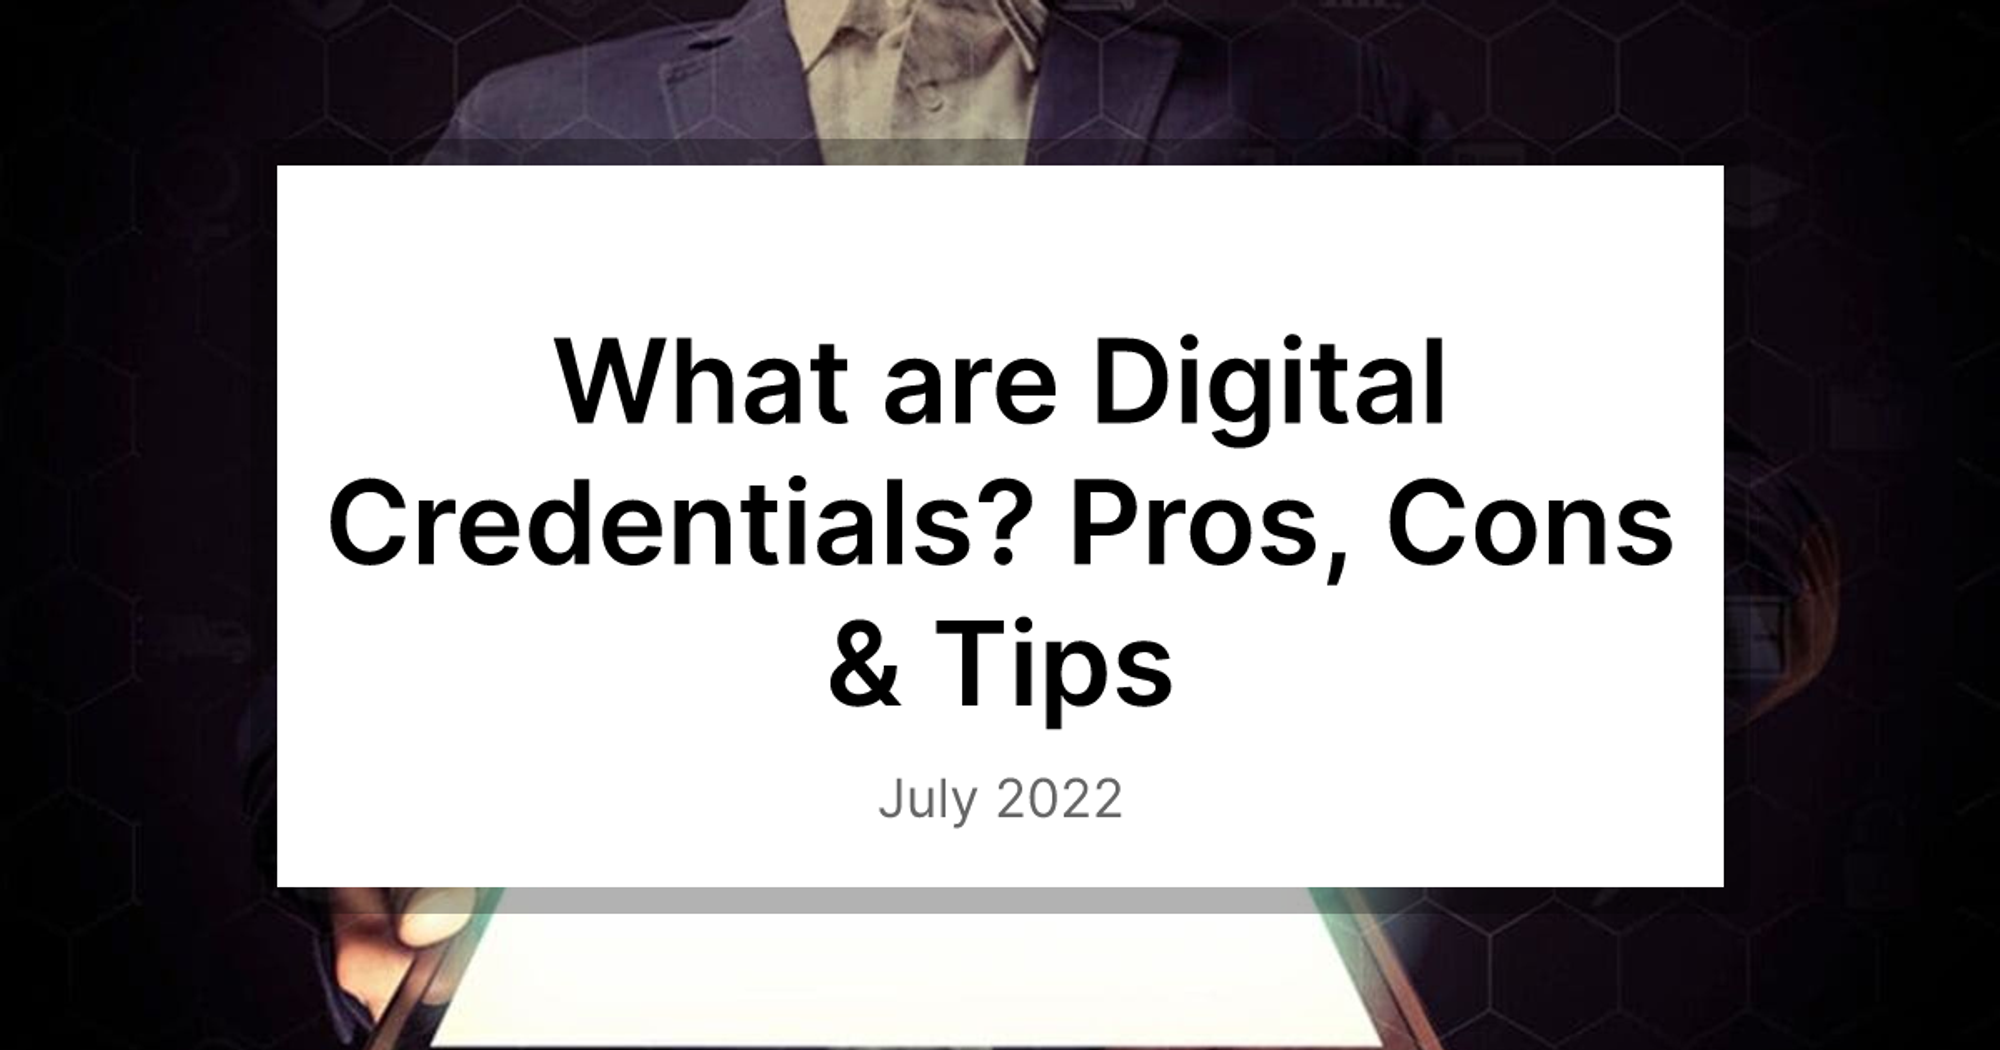 What are Digital Credentials? Pros, Cons & Tips